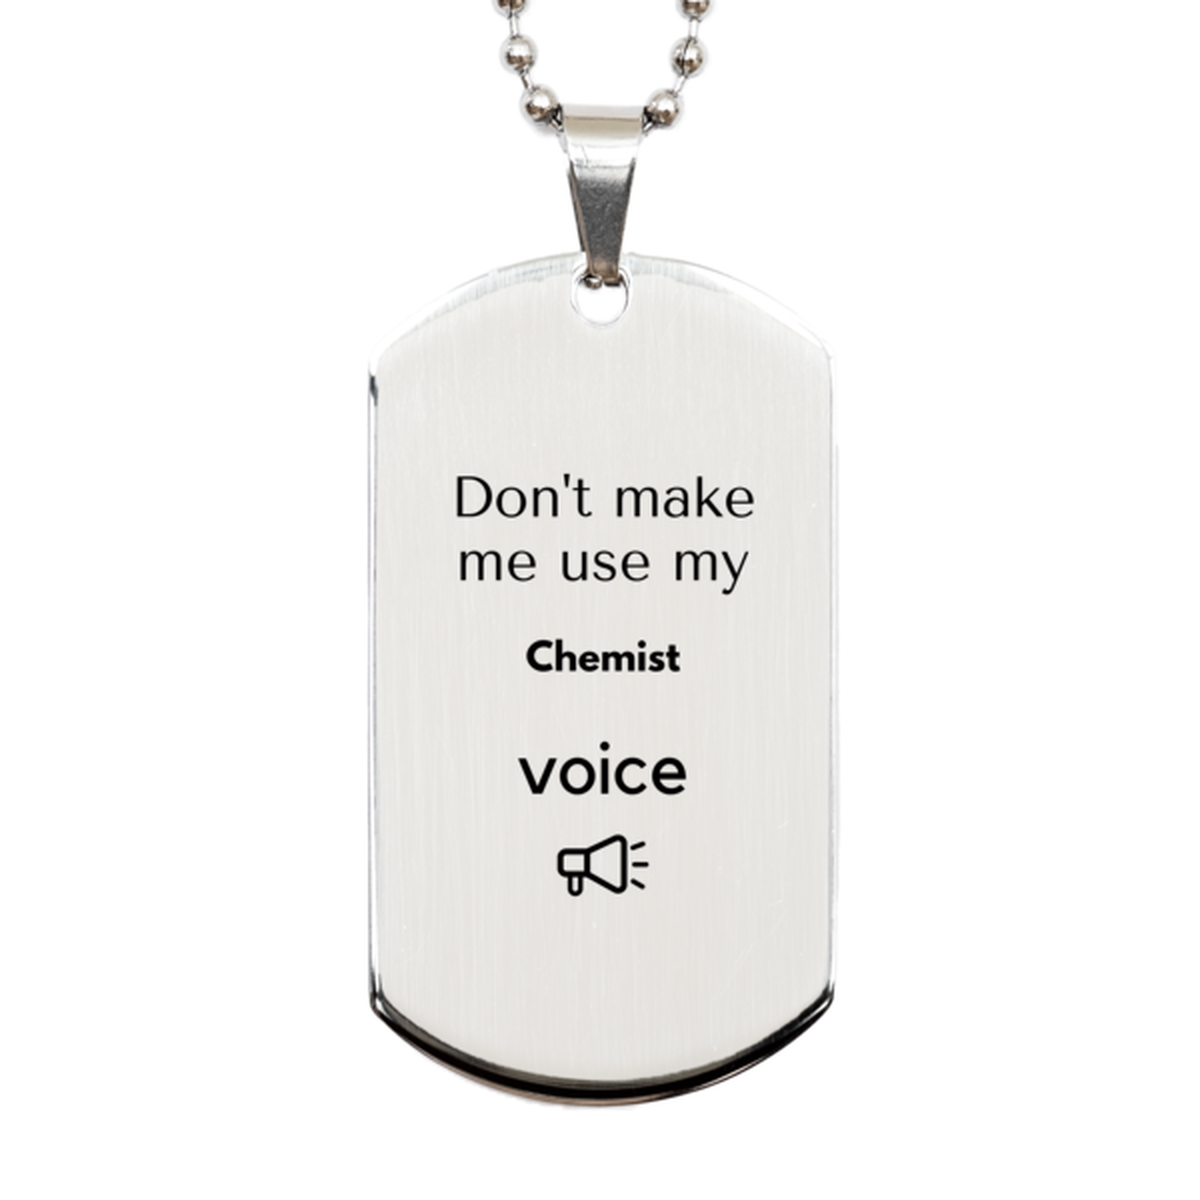 Don't make me use my Chemist voice, Sarcasm Chemist Gifts, Christmas Chemist Silver Dog Tag Birthday Unique Gifts For Chemist Coworkers, Men, Women, Colleague, Friends